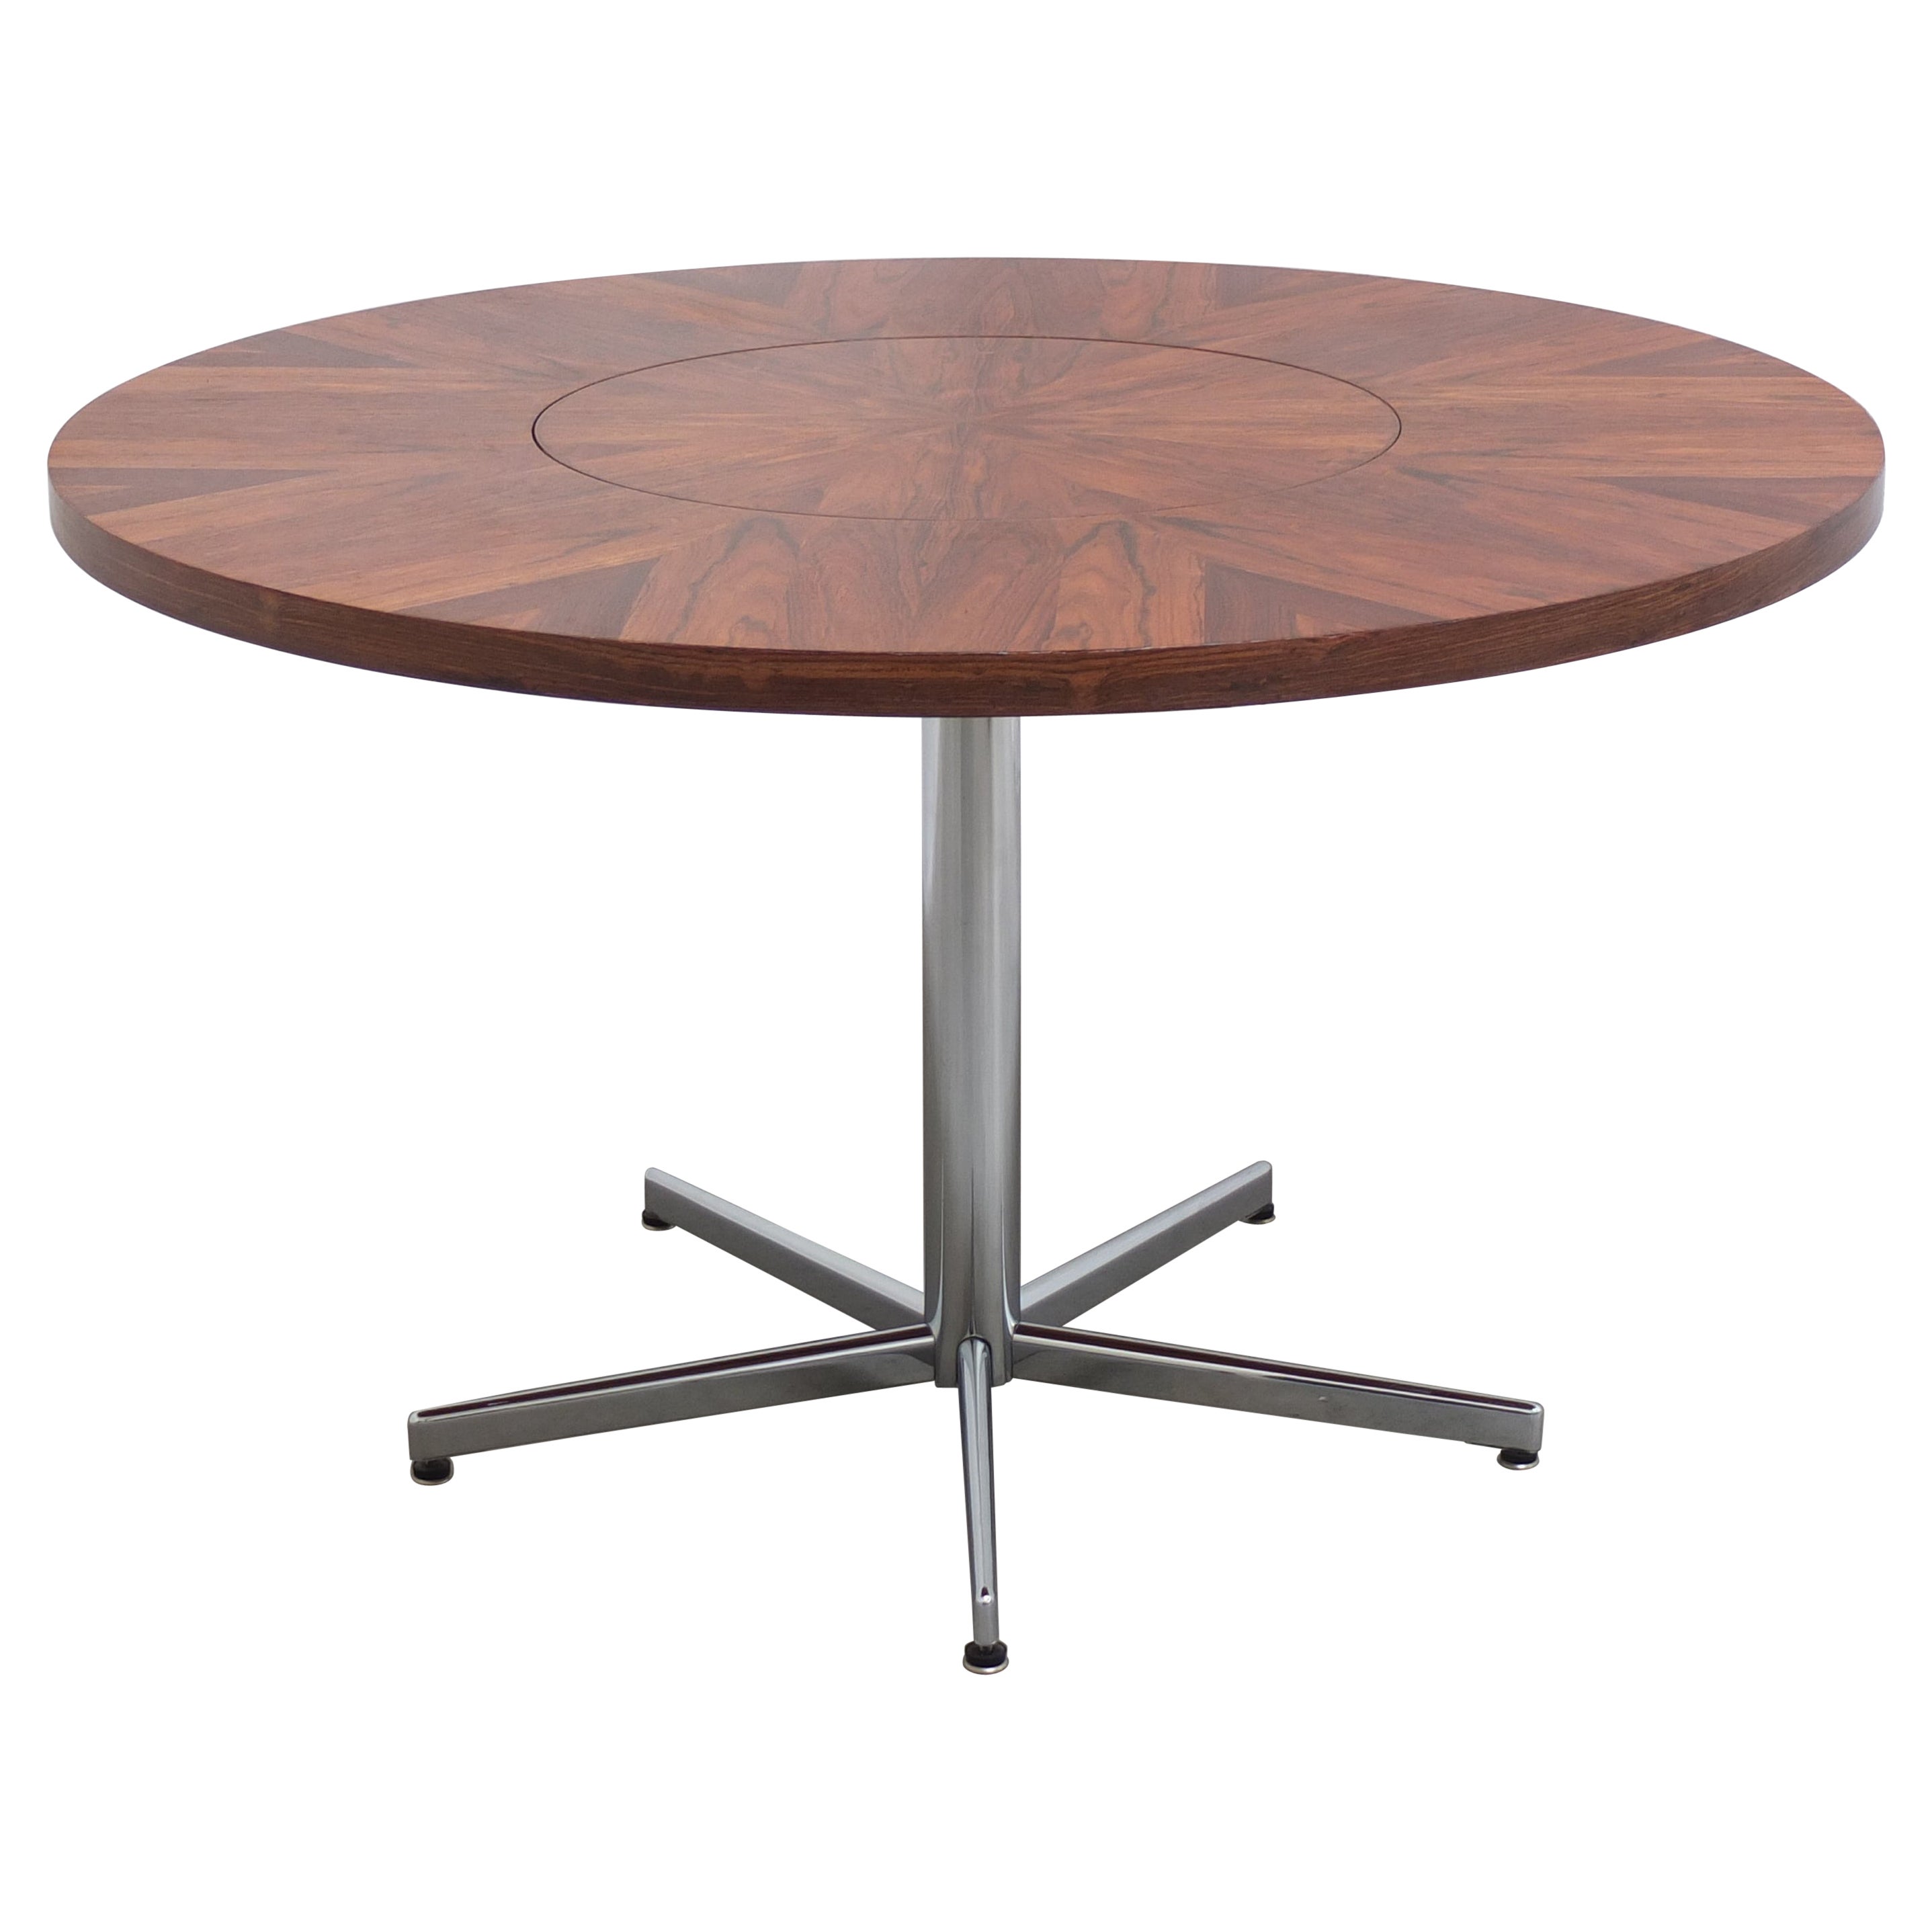 Round Rosewood Table with Rotating Center by EMÜ Germany, 1960s